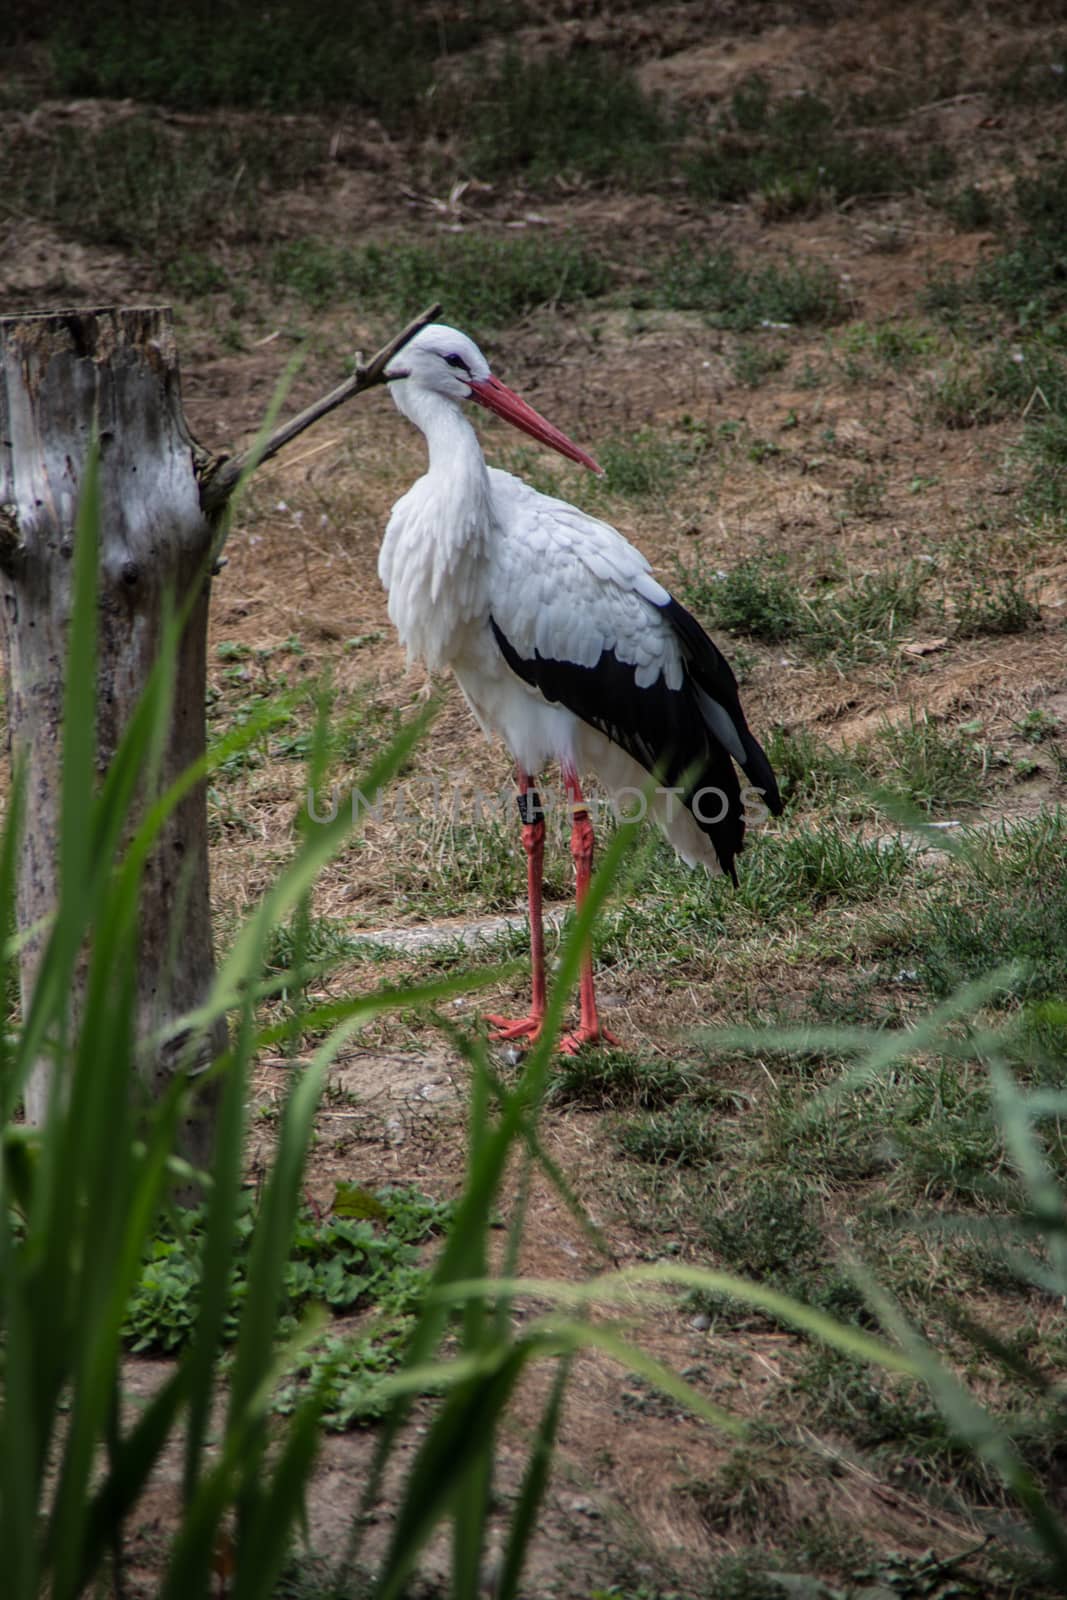 Rattle stork with long, stacking legs